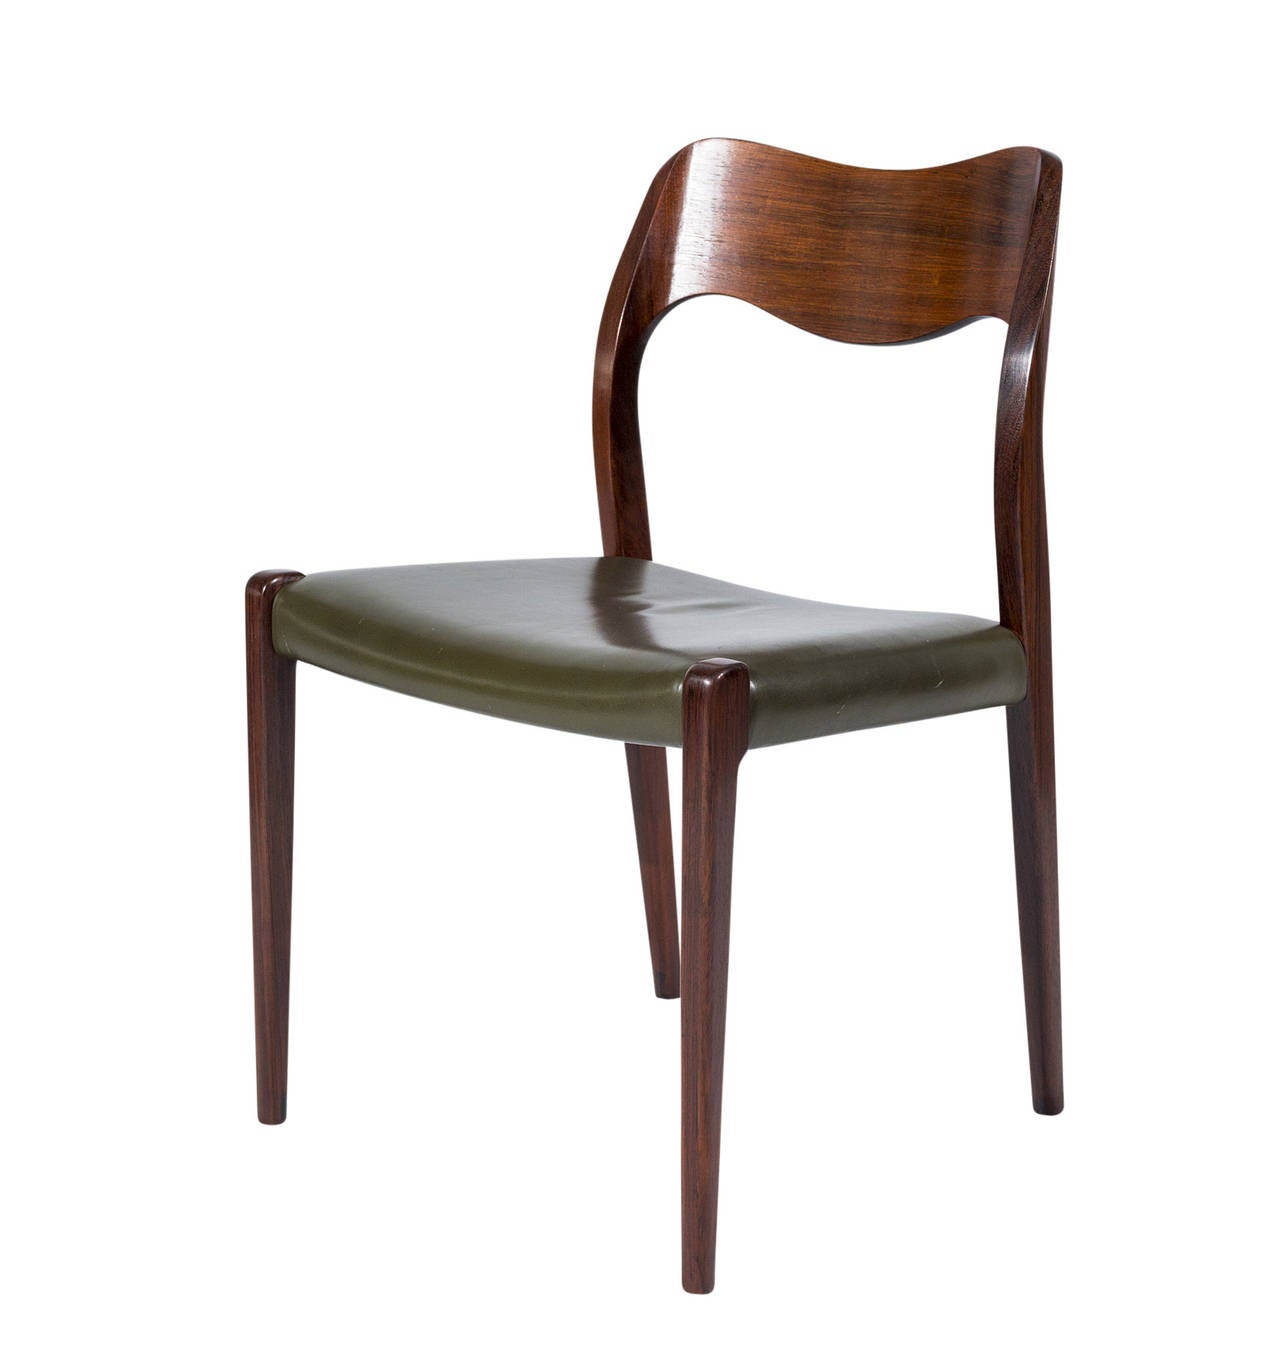 Set of four rosewood Niels Møller model #71 dining chairs designed in 1951 and produced by J. L. Moller Mobelfabrik.